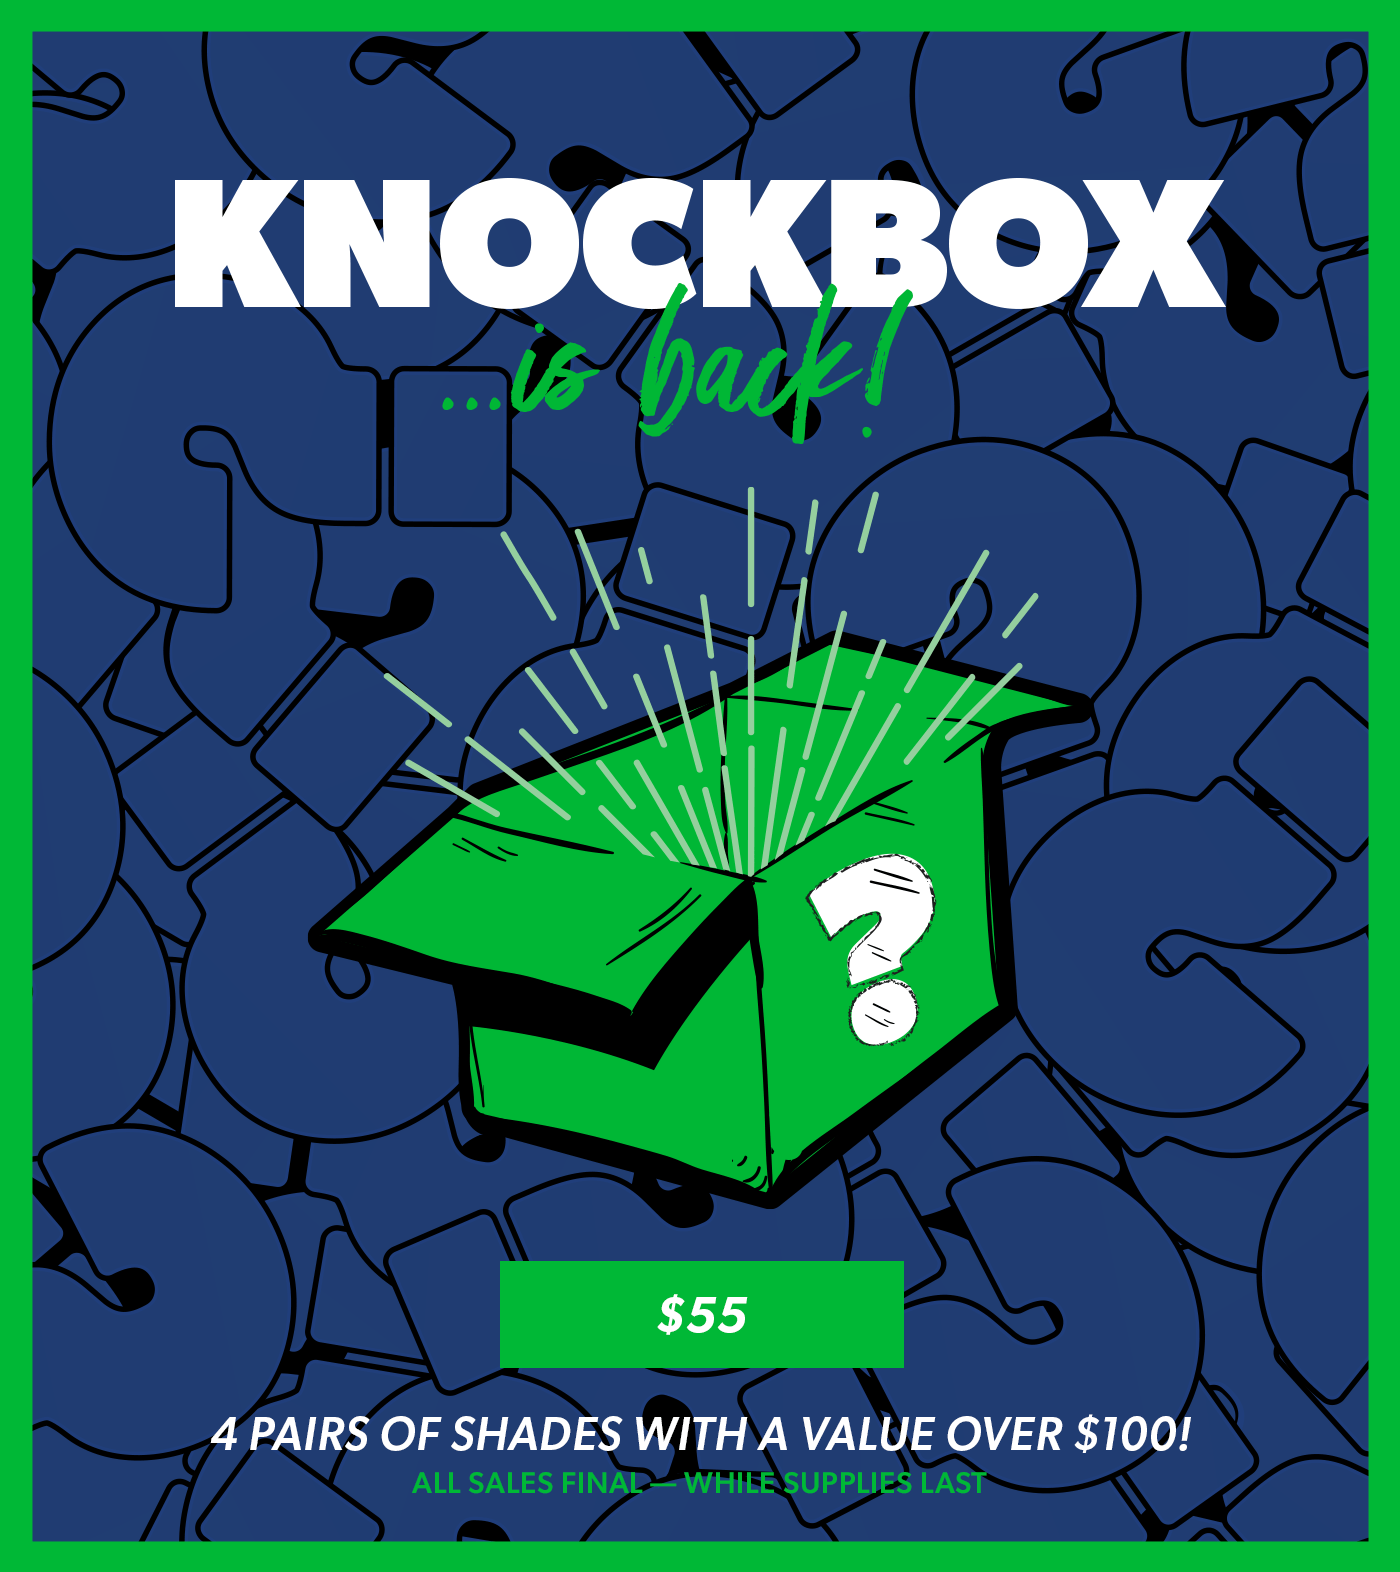 Read more about the article Knockaround Sunglasses Knock Box Mystery Box!